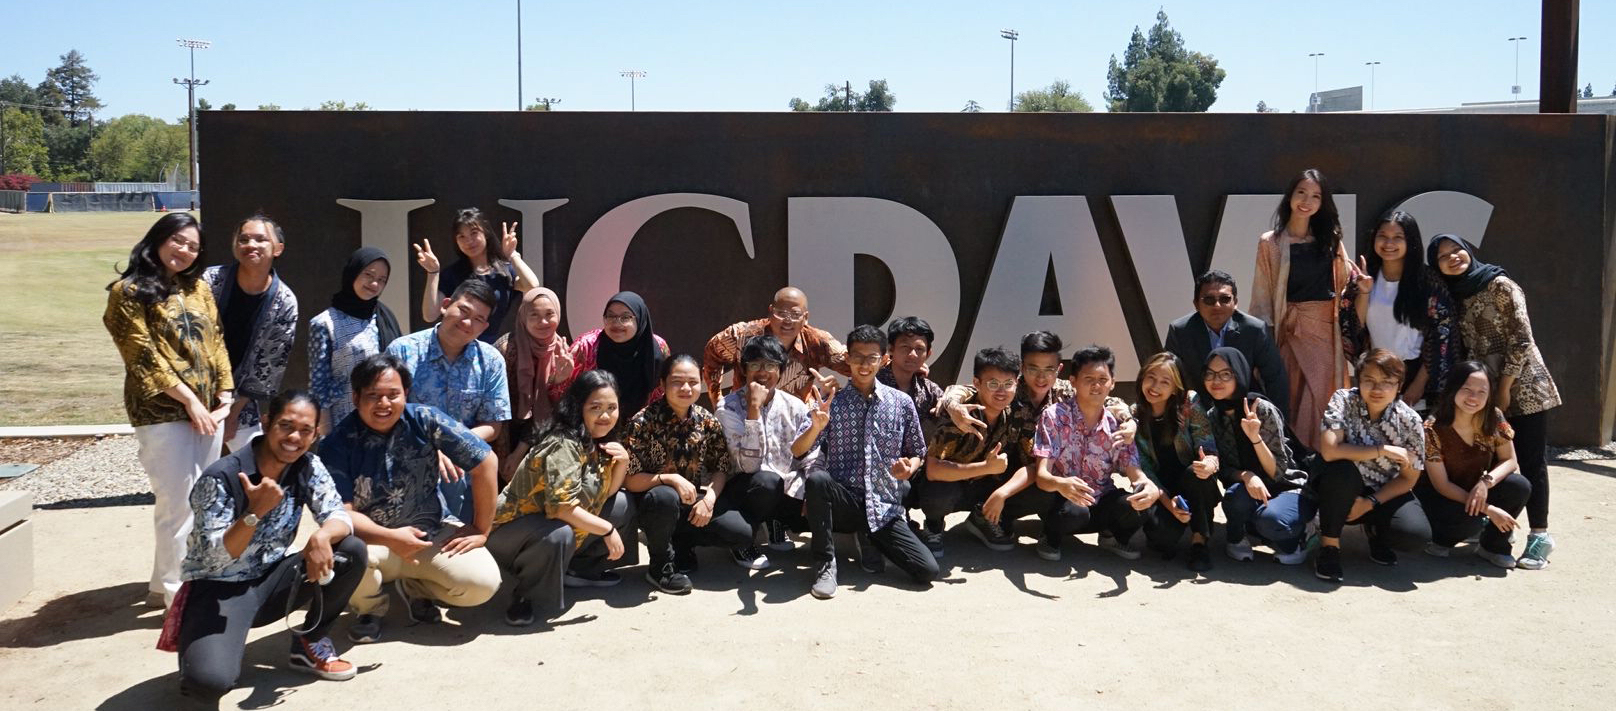 The group of students from Indonesia and members of the Office of the Consulate General squat, kneel and stand in front of a large gray stone wall with large white letters that read "UC Davis". This sign on the edge of campus is in the sunlight on a warm and sunny day.